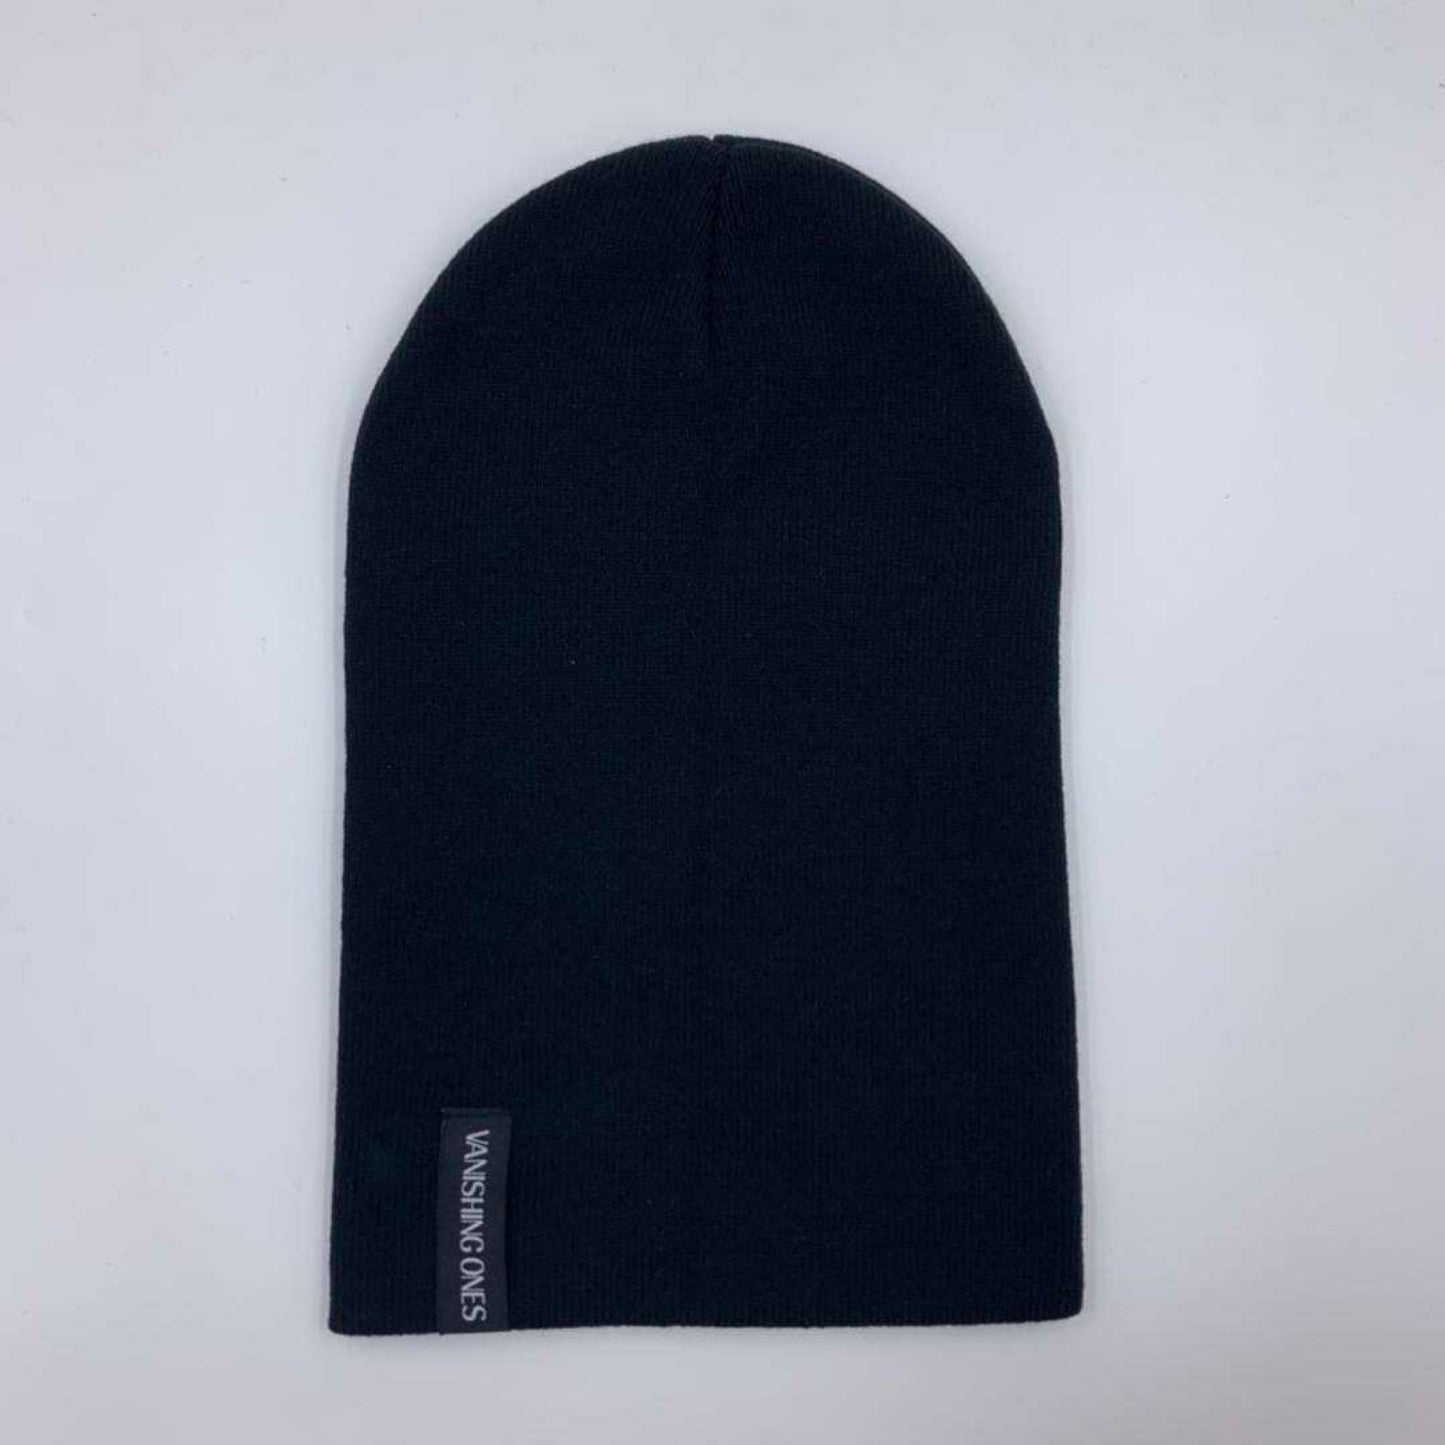 THE SEX PANTHER BEANIE